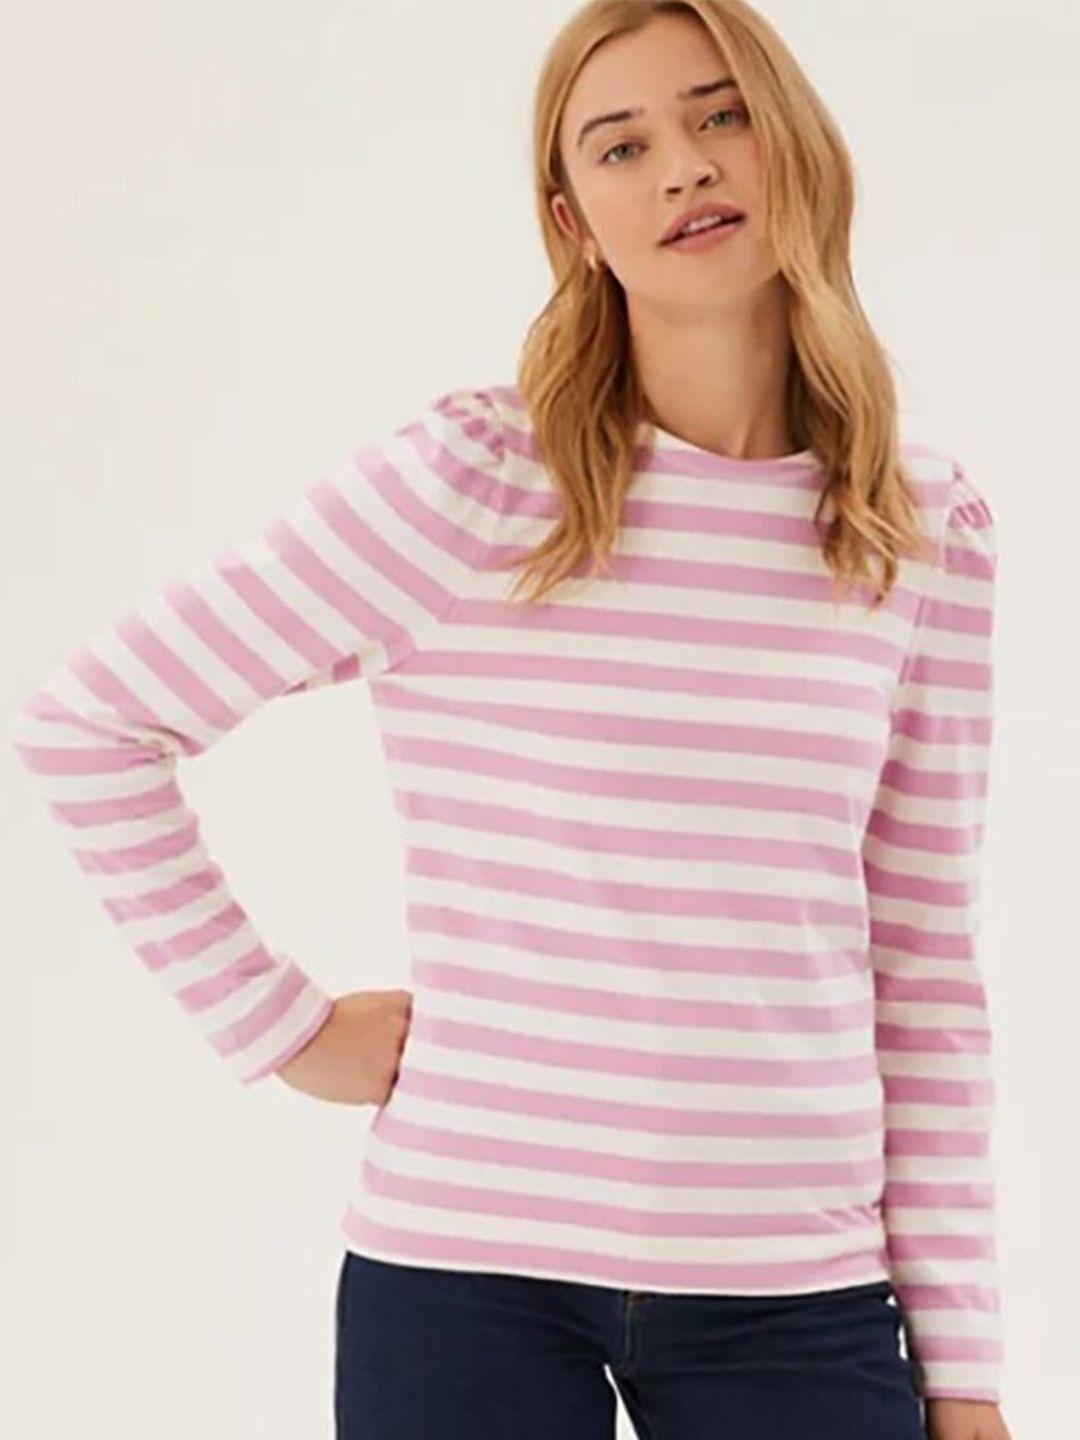 marks & spencer women pink striped top